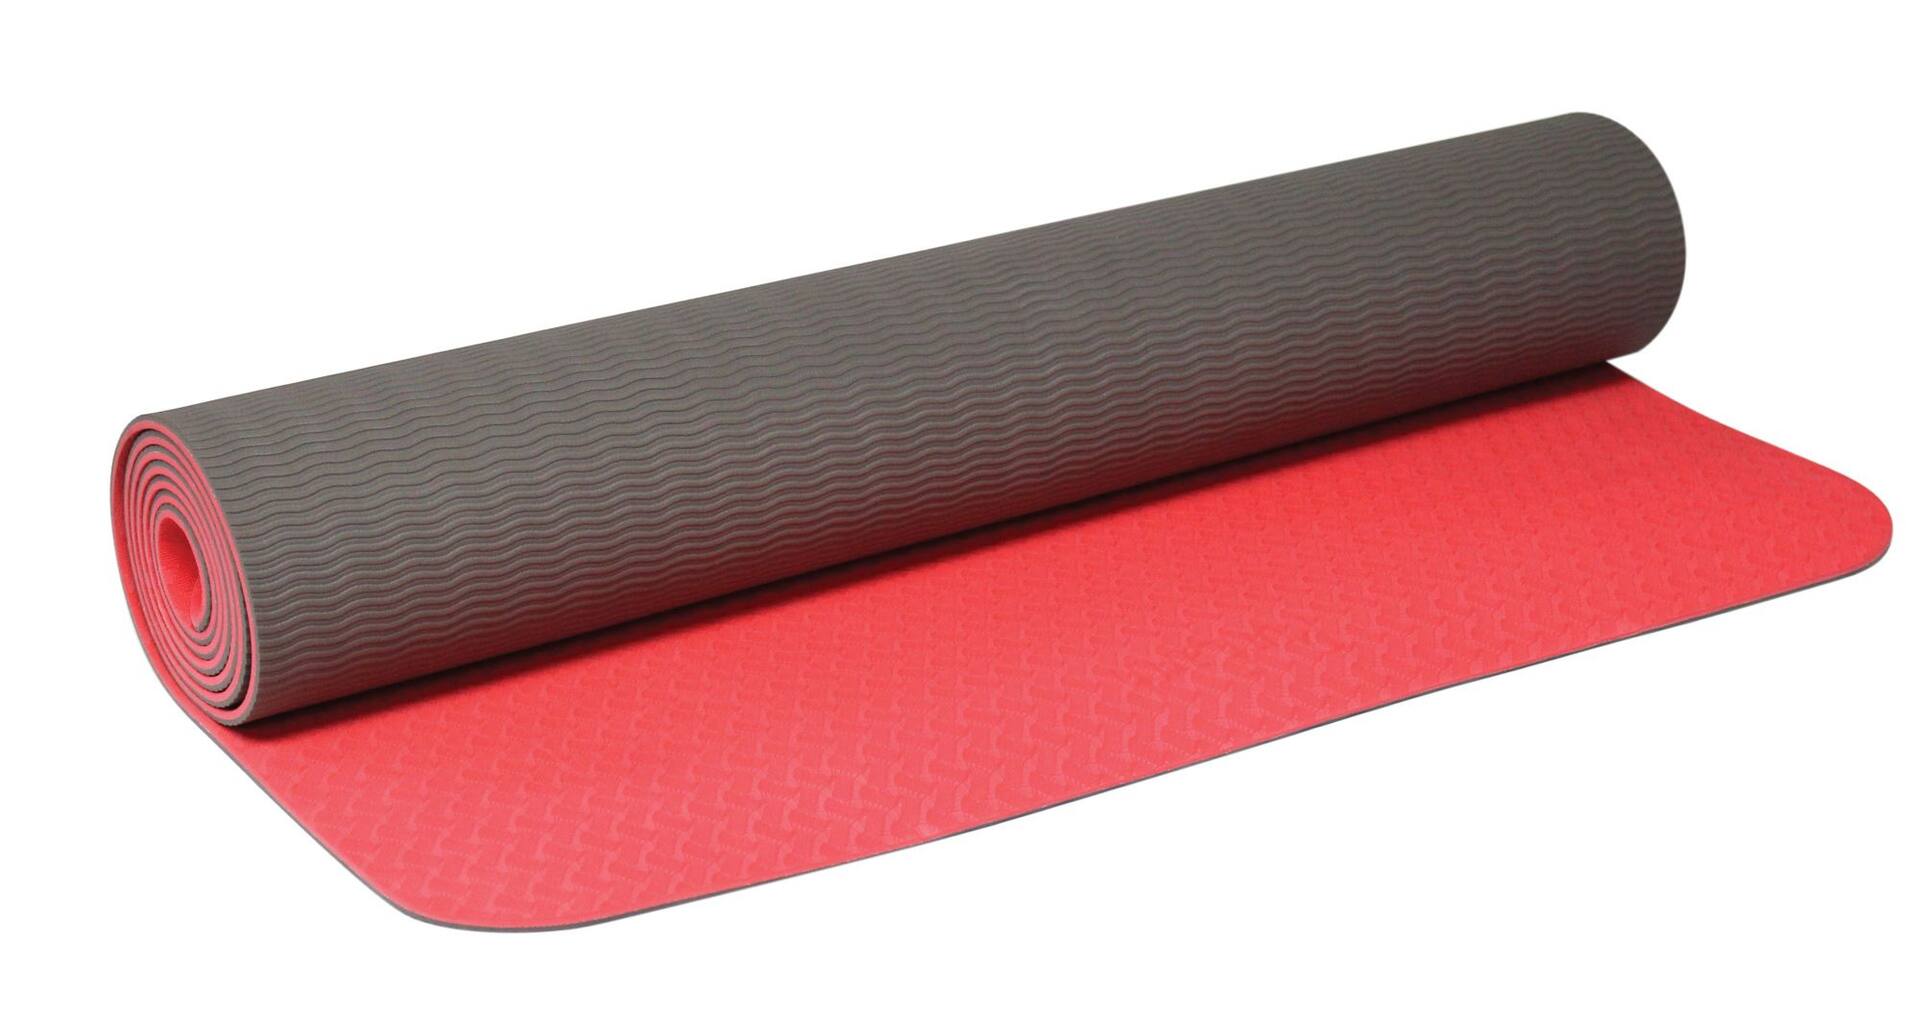 What's The Difference Between A Cheap Yoga Mat And An Expensive One?